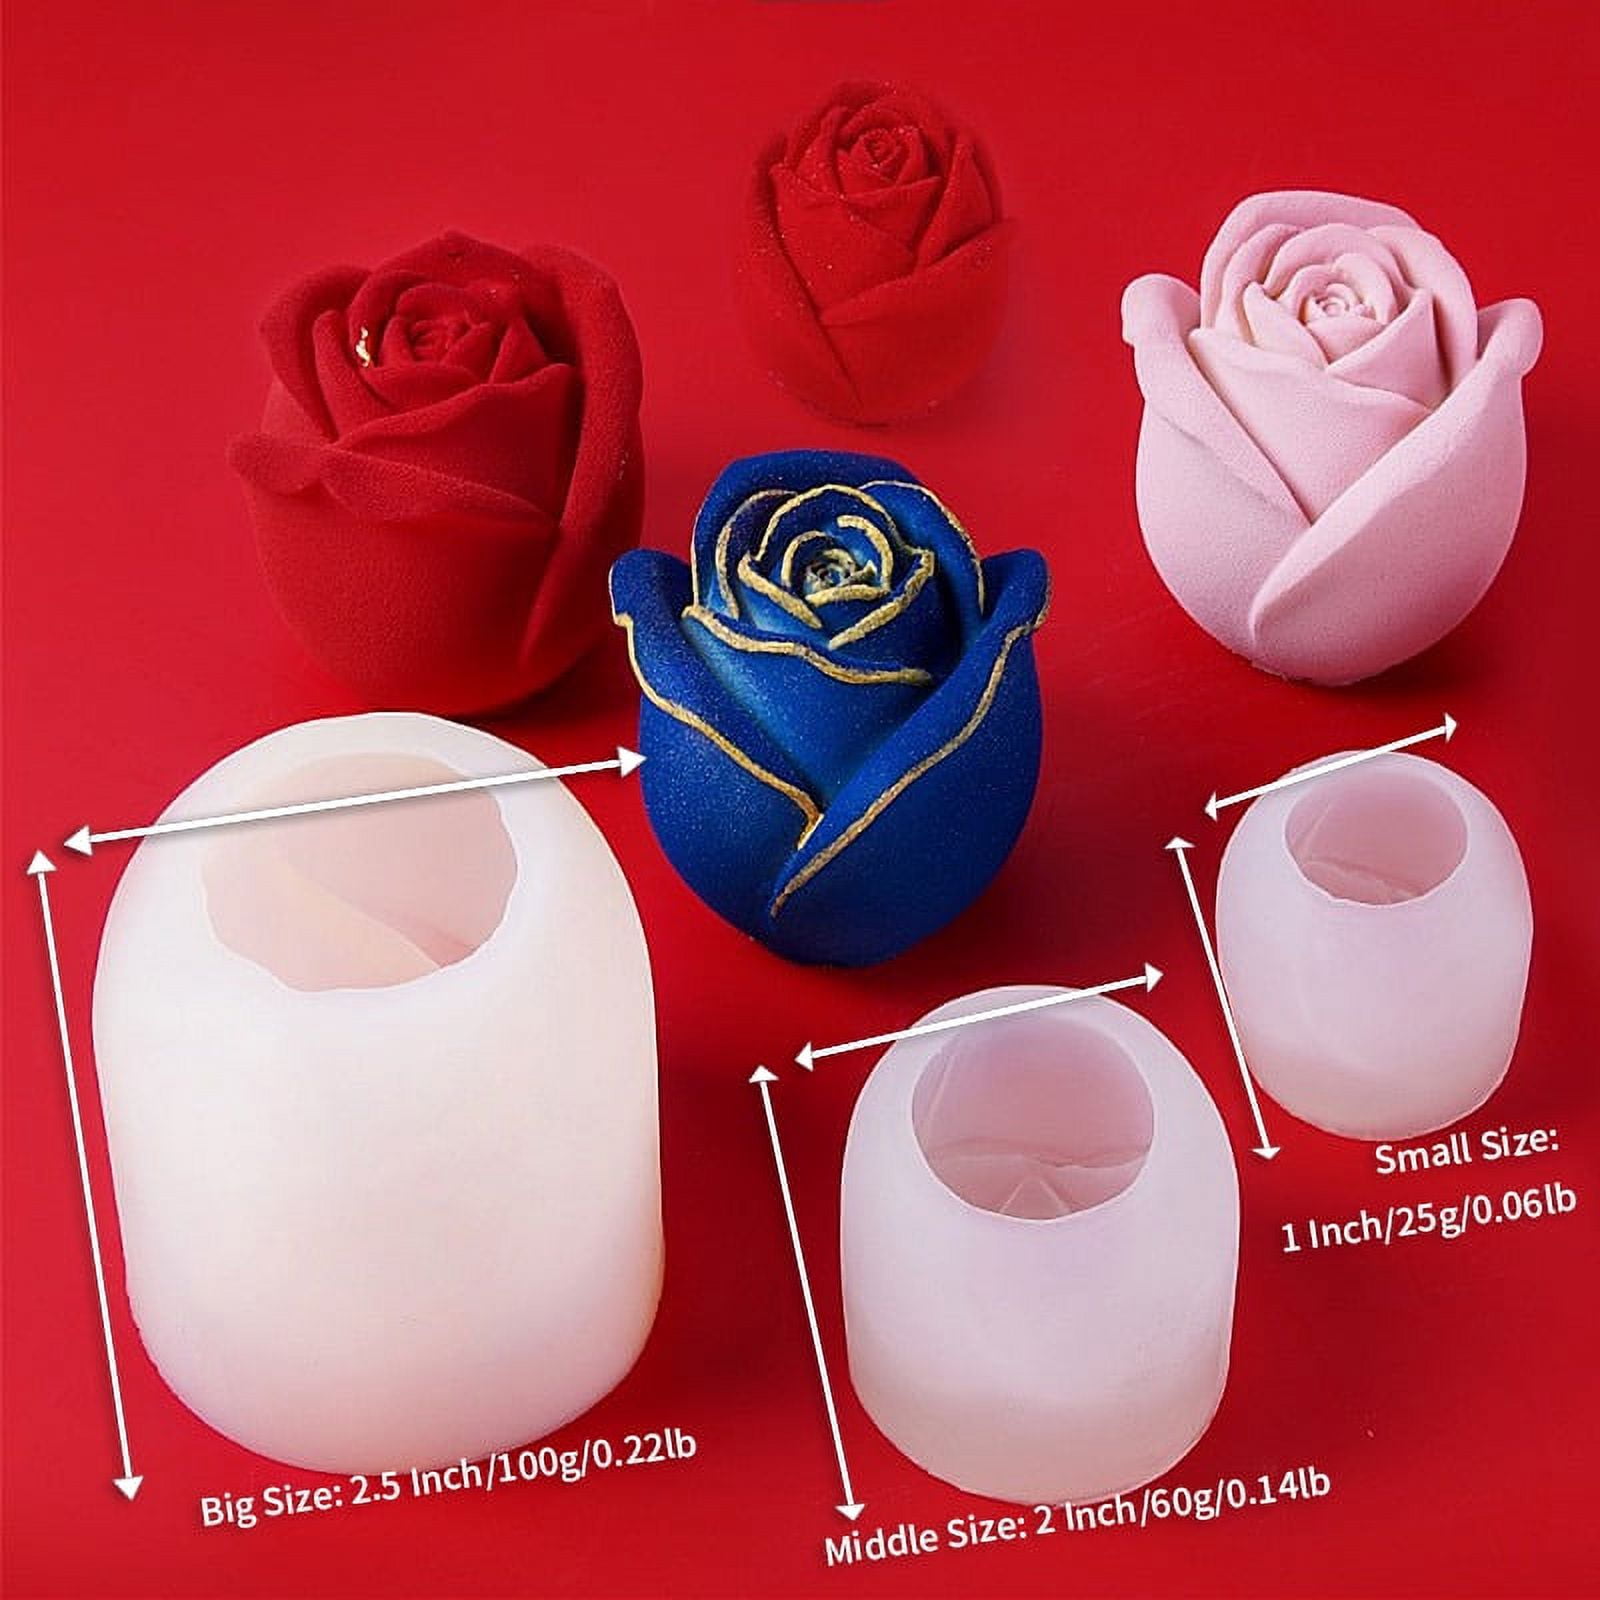 Vodolo Rose Ice Cube Mold,4 PCS Silicone Rose Ice Cube Tray,Valentine Day  Gift Flower Shaped Molds for Chocolate,Candy,Mimosas,Cake,Cocktails,Baking  - Yahoo Shopping